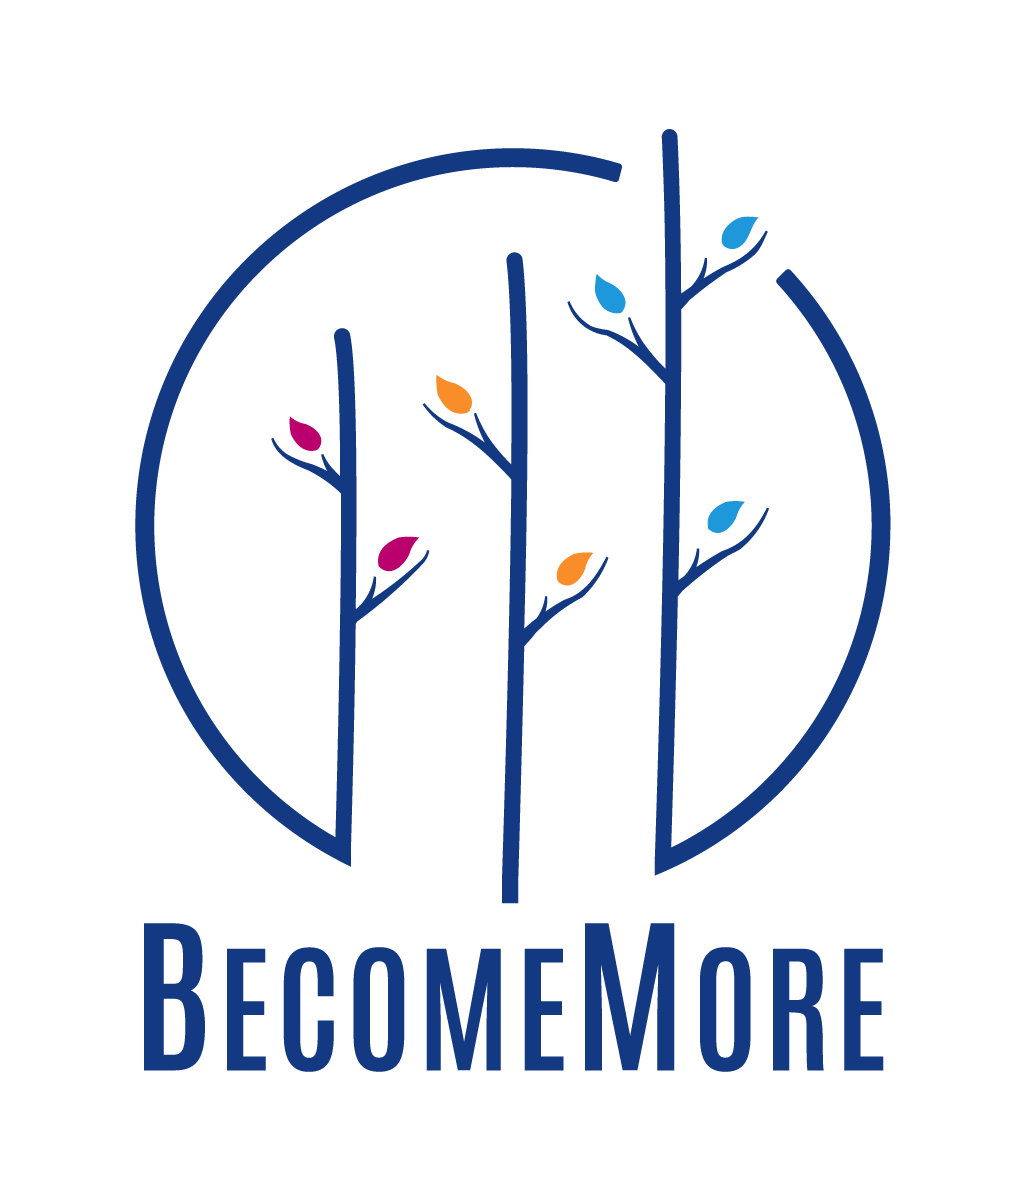 BecomeMore